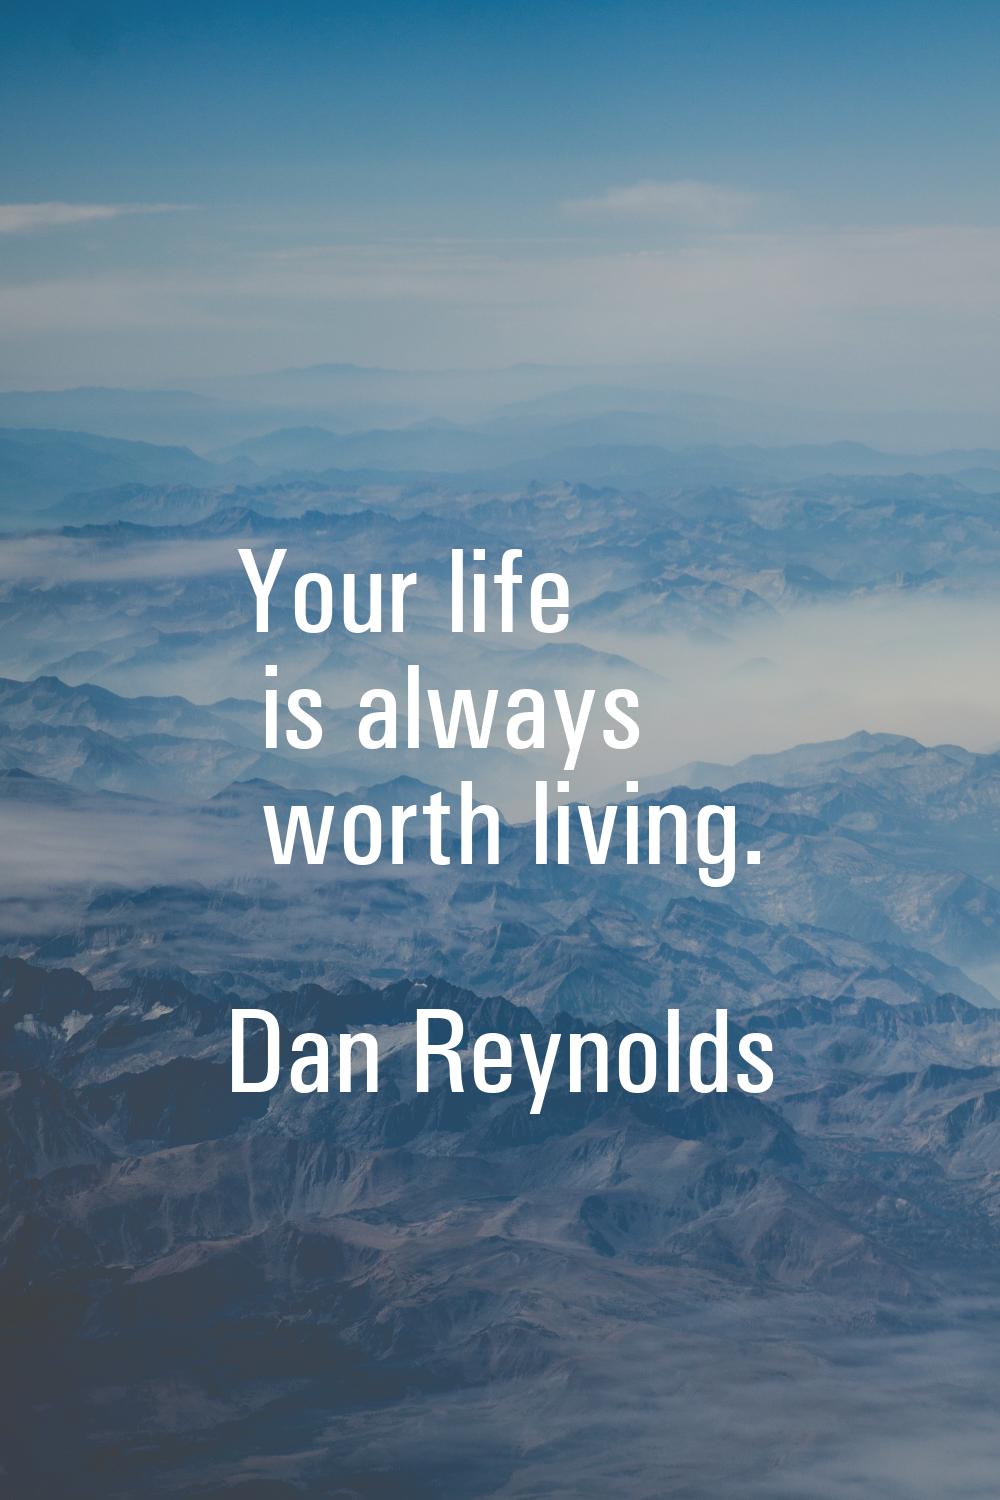 Your life is always worth living.